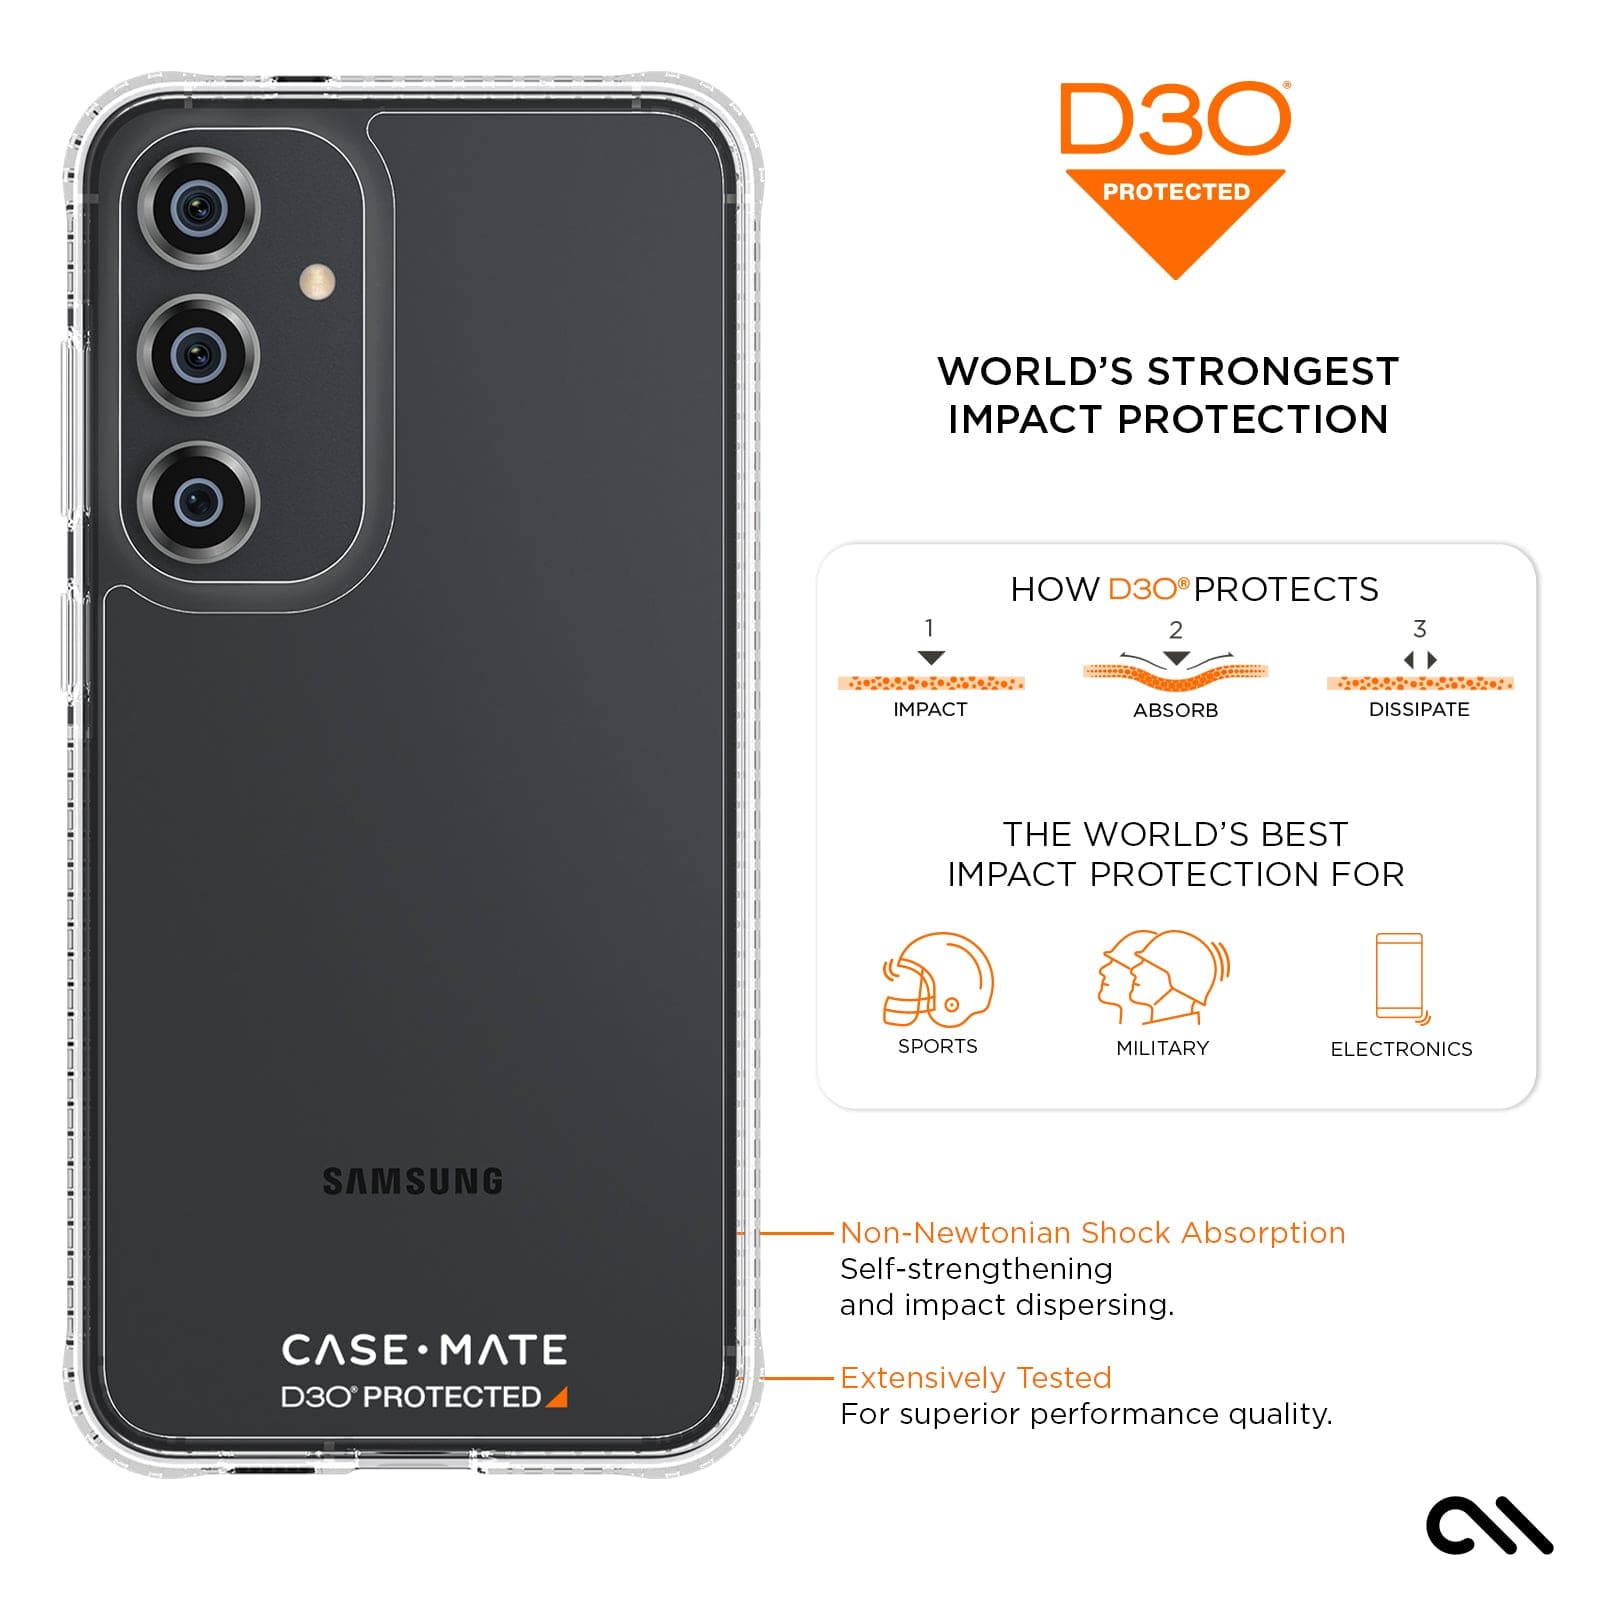 D3O WORLD'S STRONGEST IMPACT PROTECTION